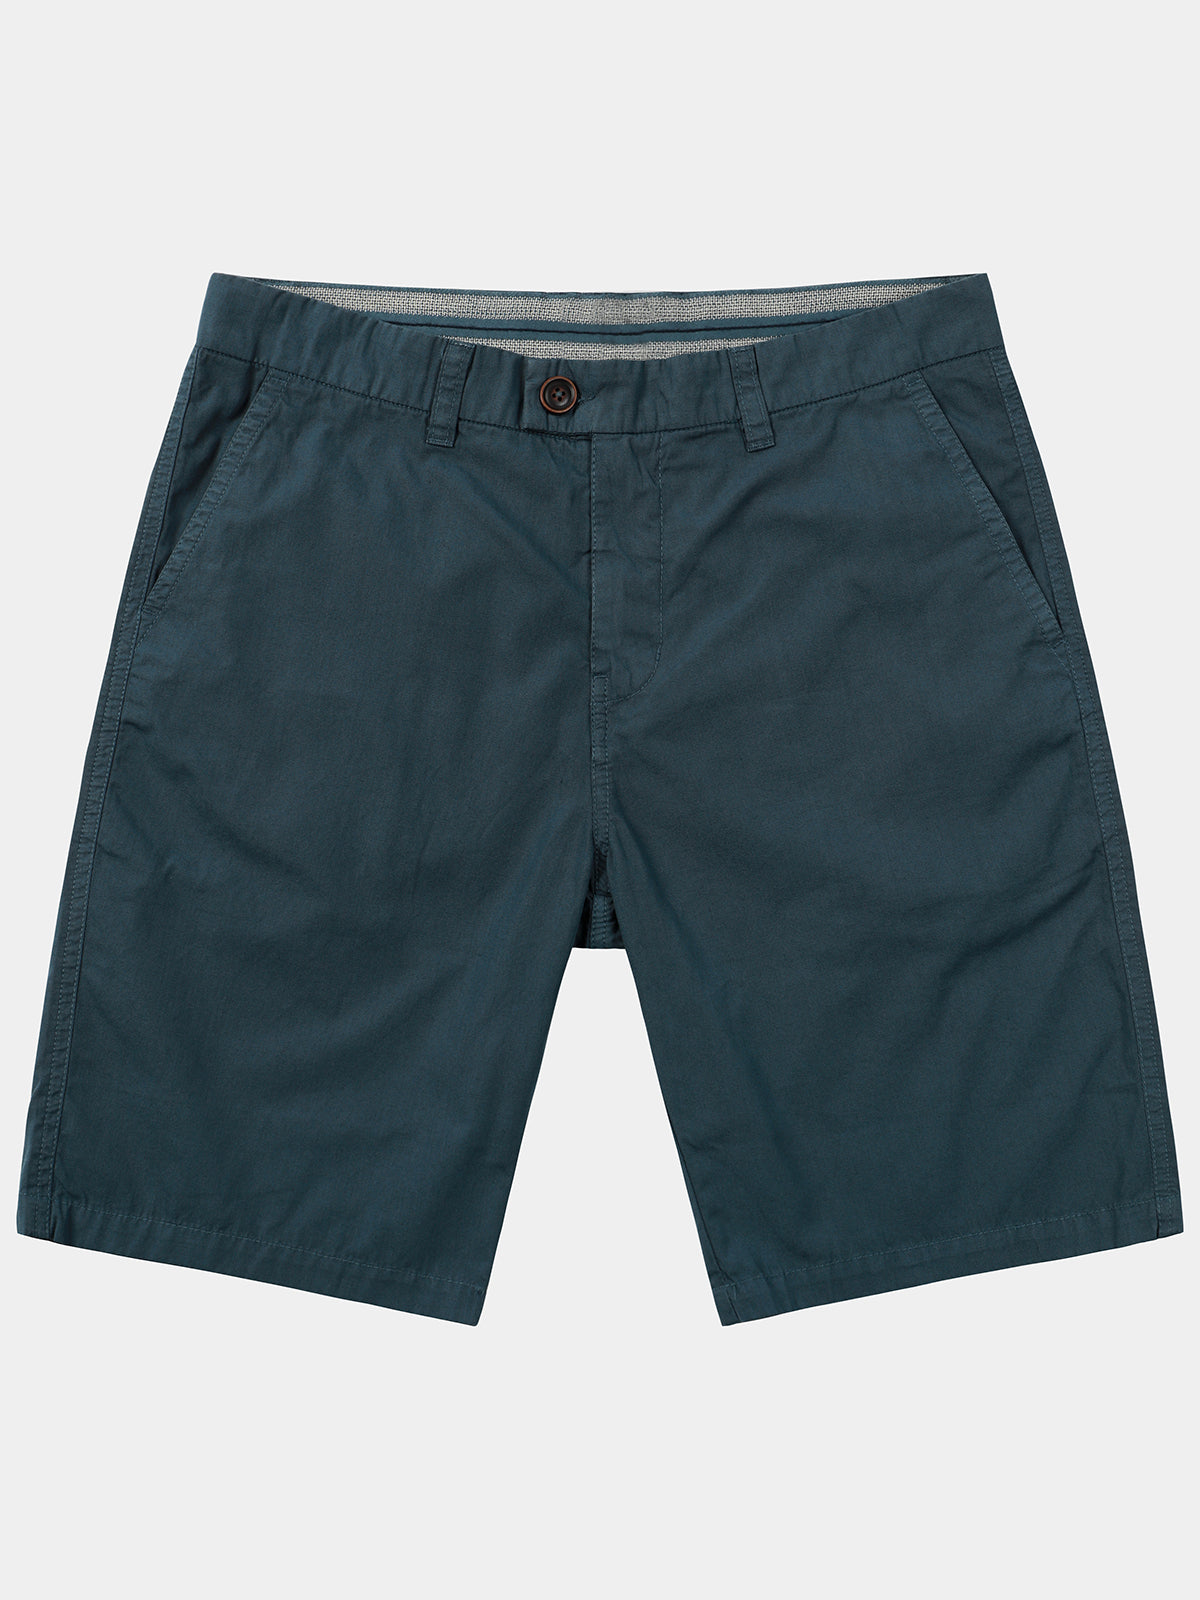 Men's Summer Casual Dark Blue Holiday Breathable Cotton Shorts